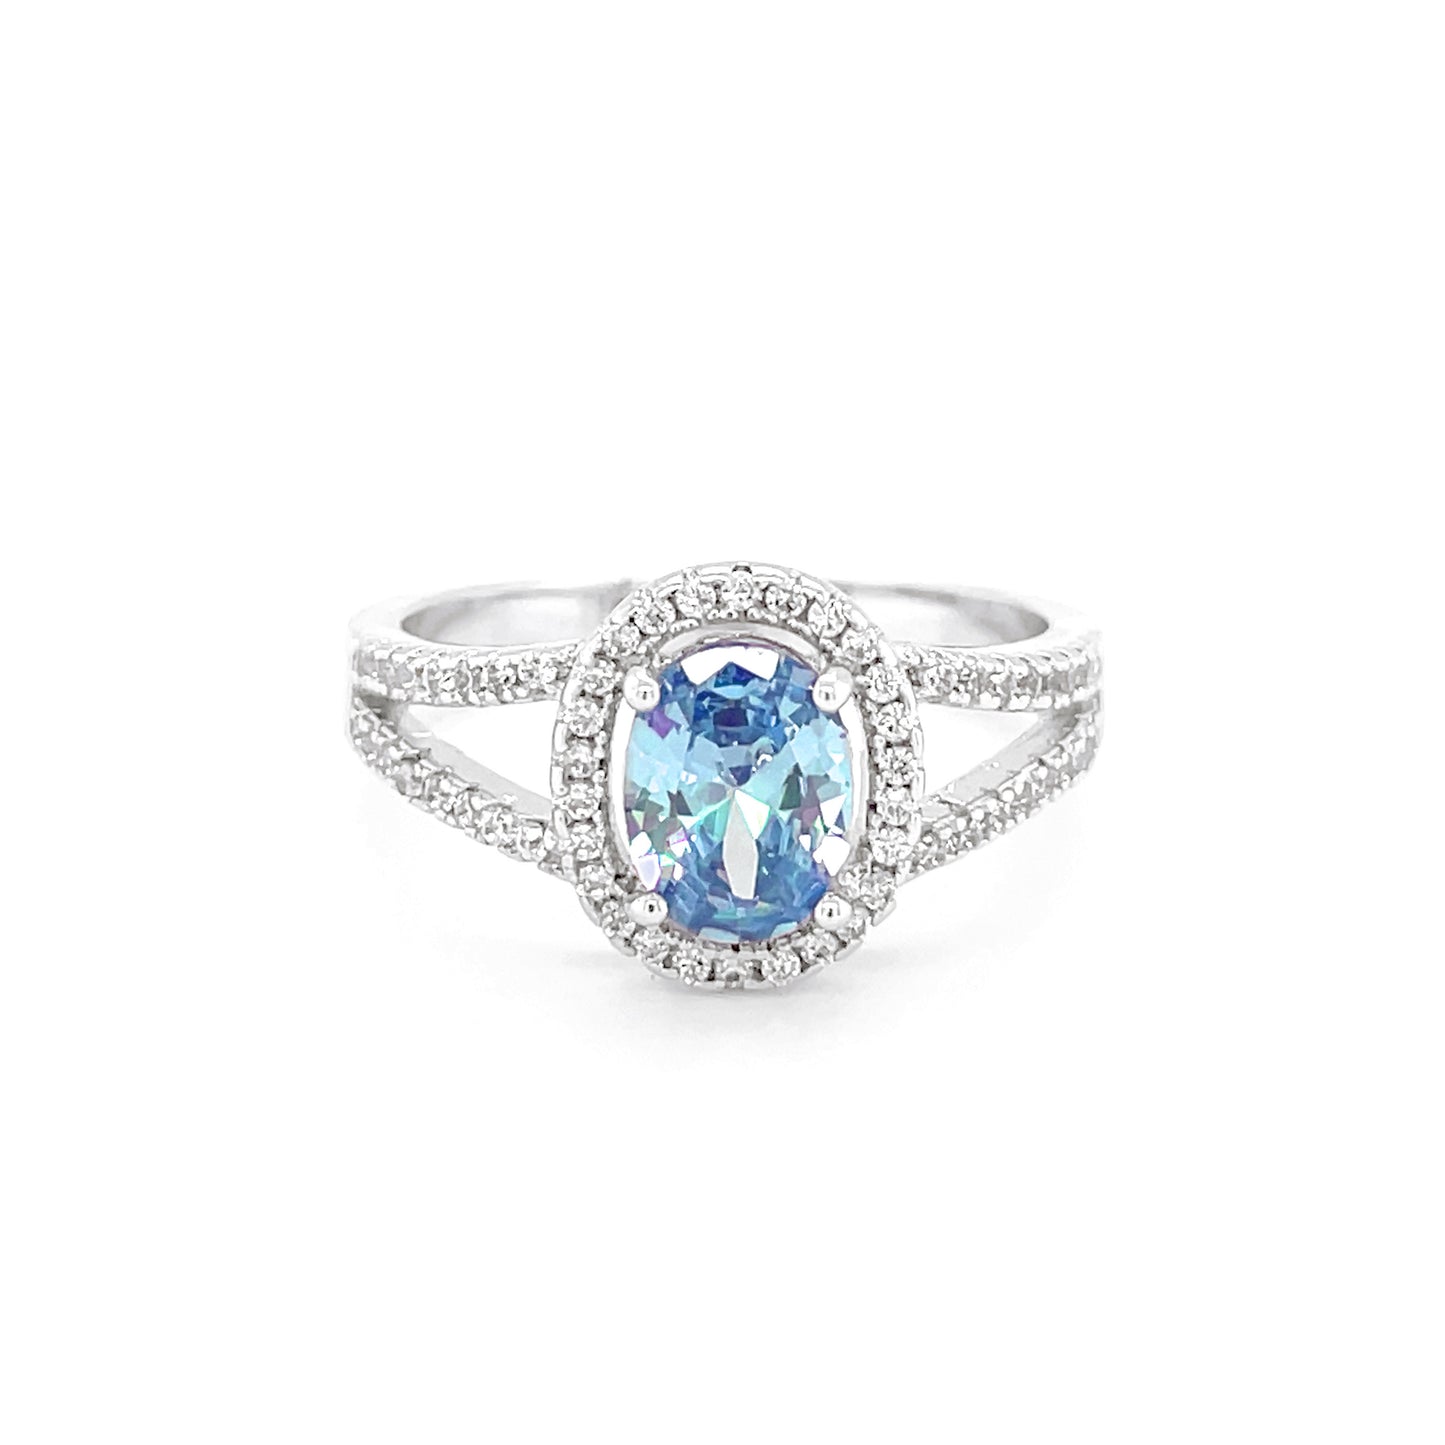 BMR84097 - Oval Cut Halo - Engagemet Ring